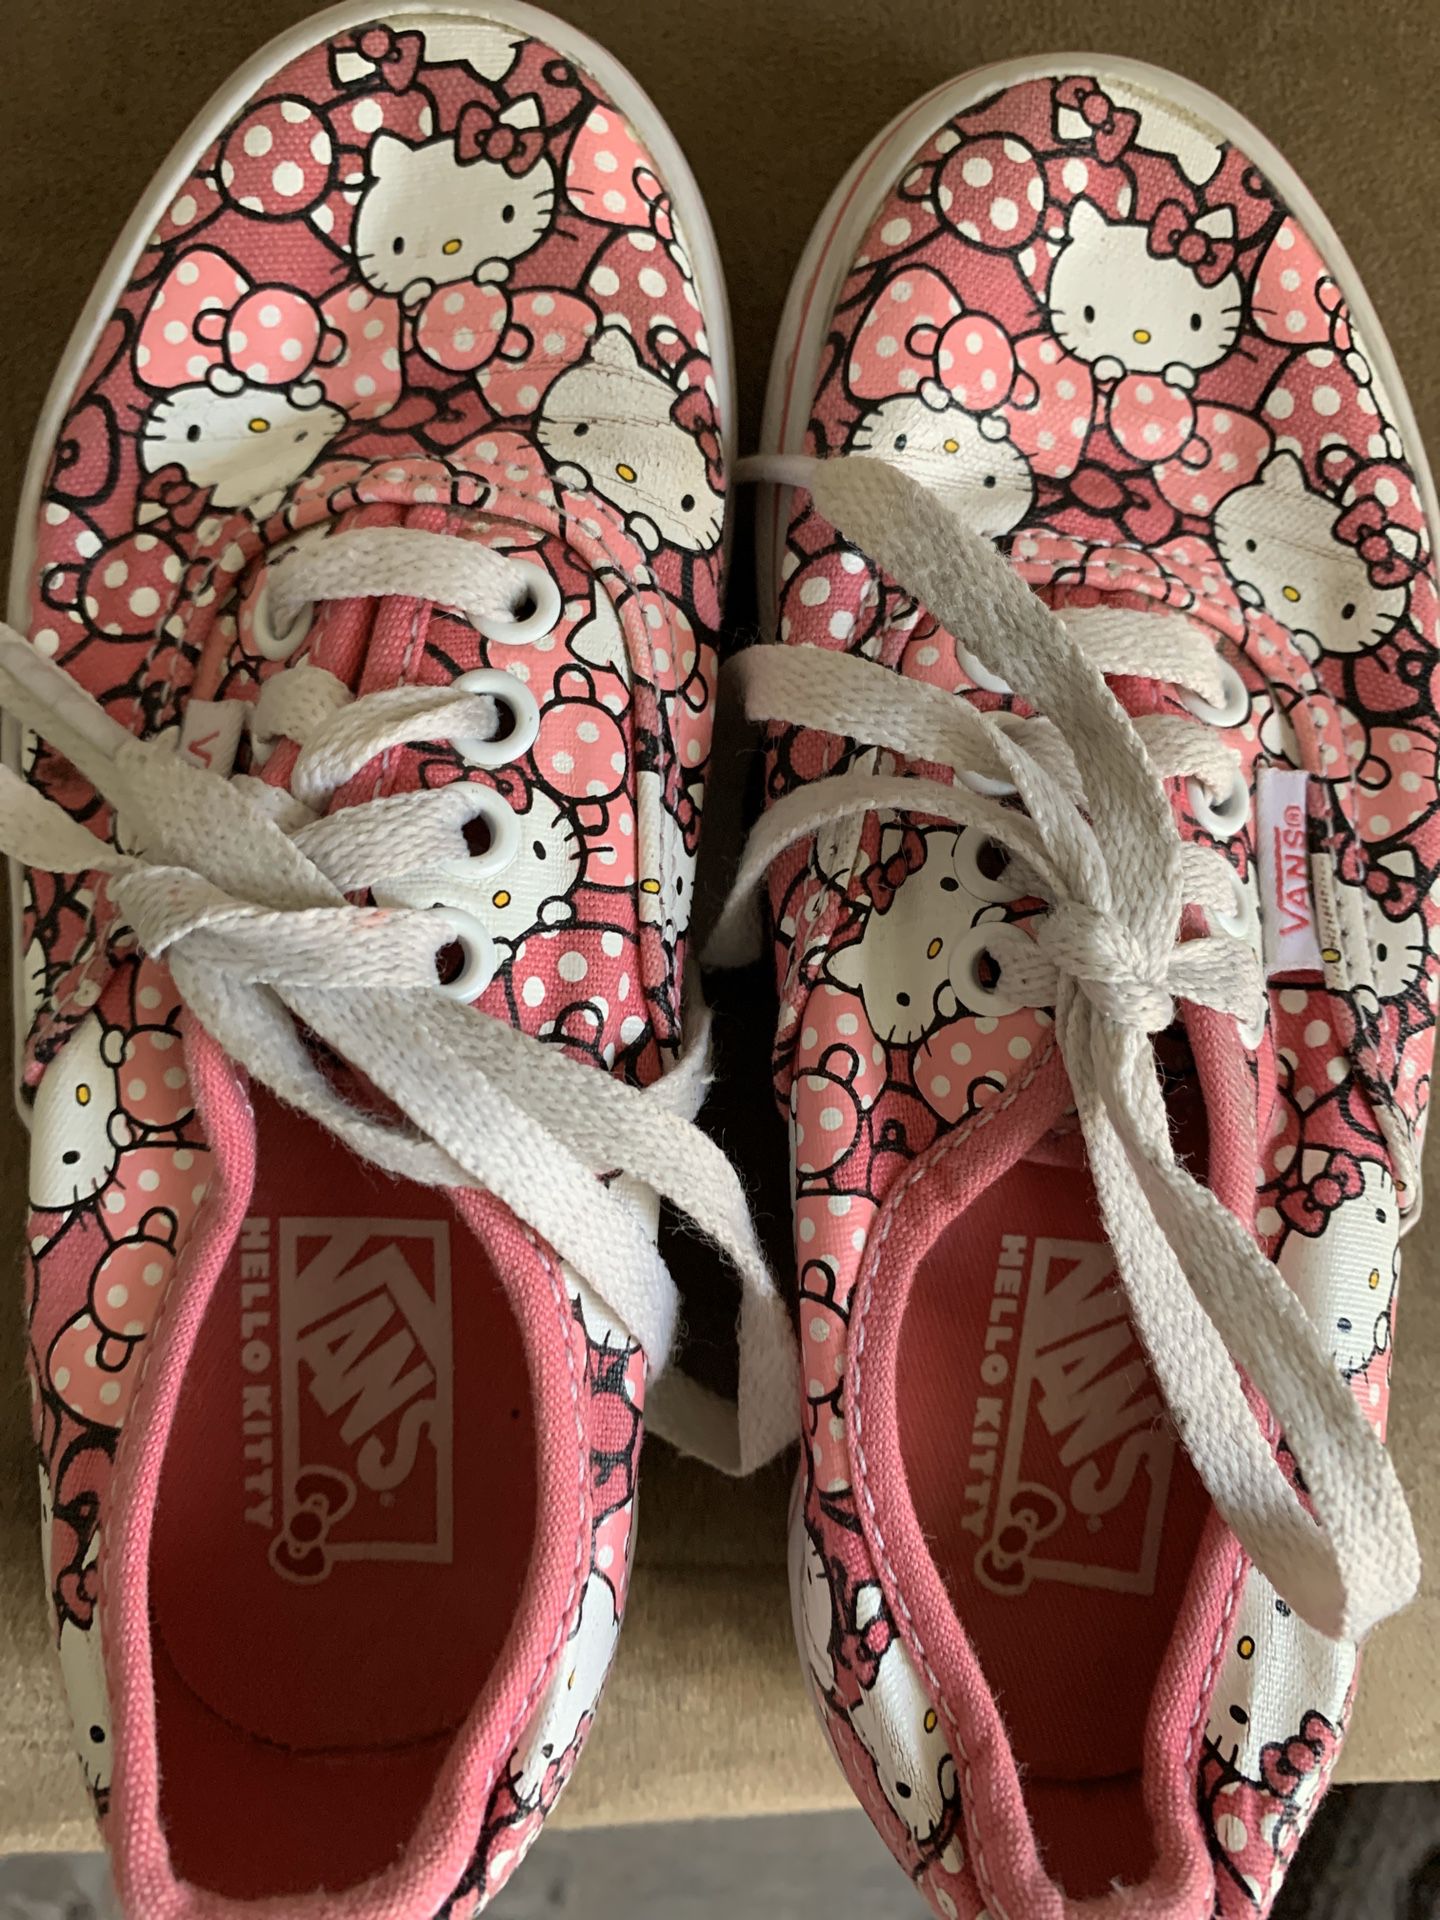 Girls toddler shoes & frozen items